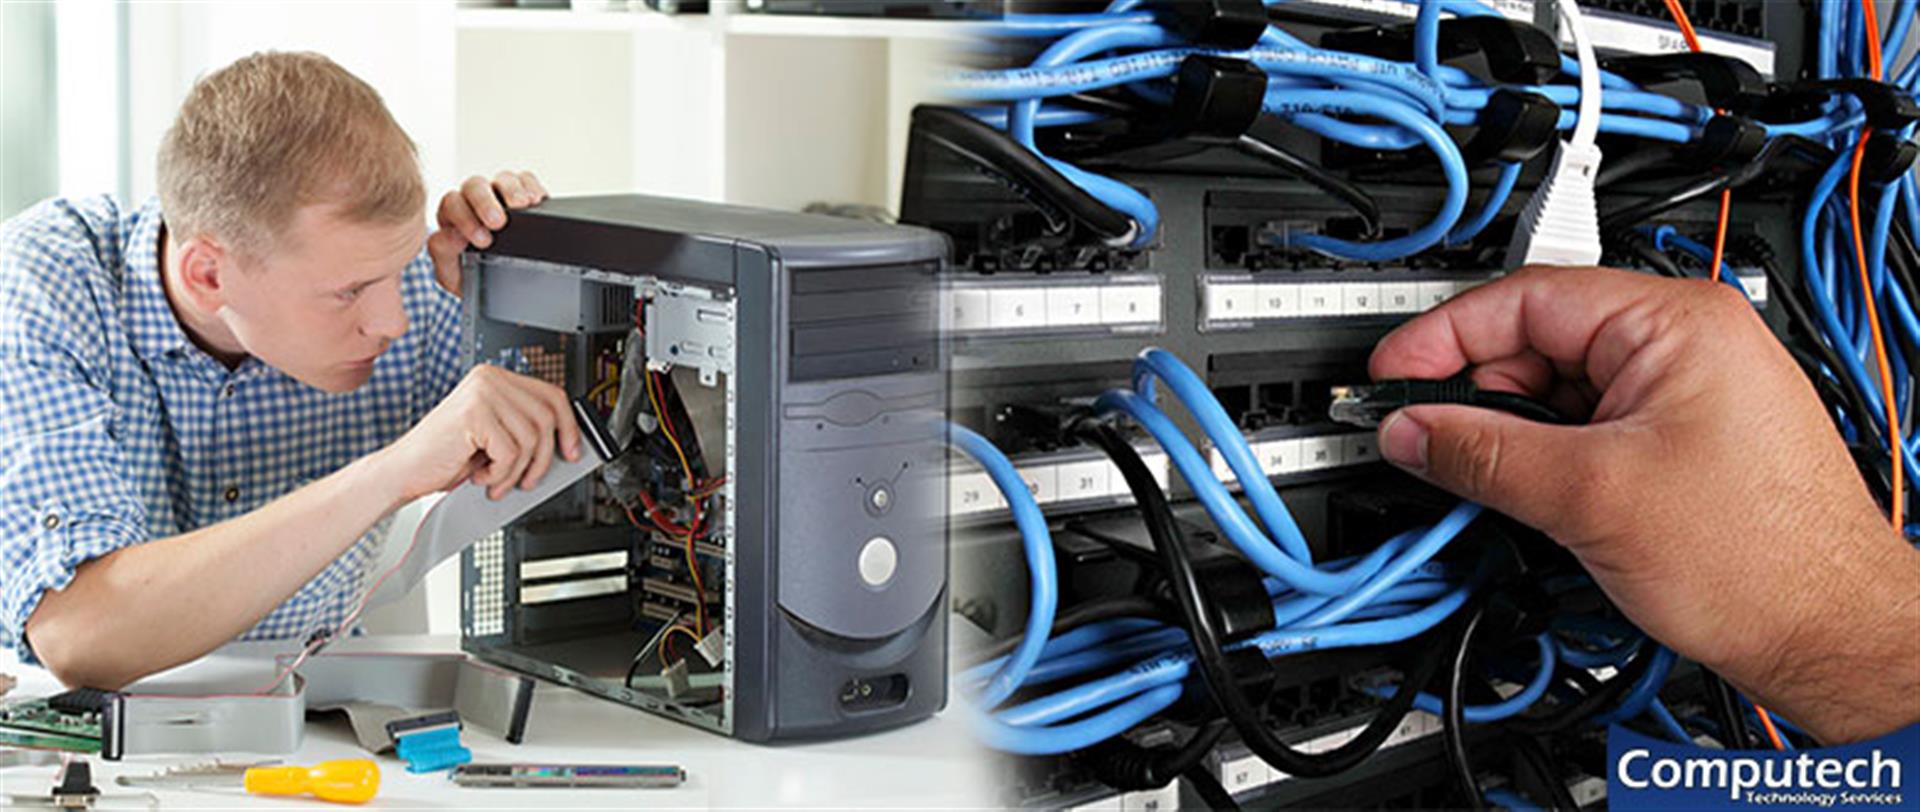 Hokes Bluff Alabama On-Site Computer PC & Printer Repair, Networks, Telecom & Data Wiring Solutions